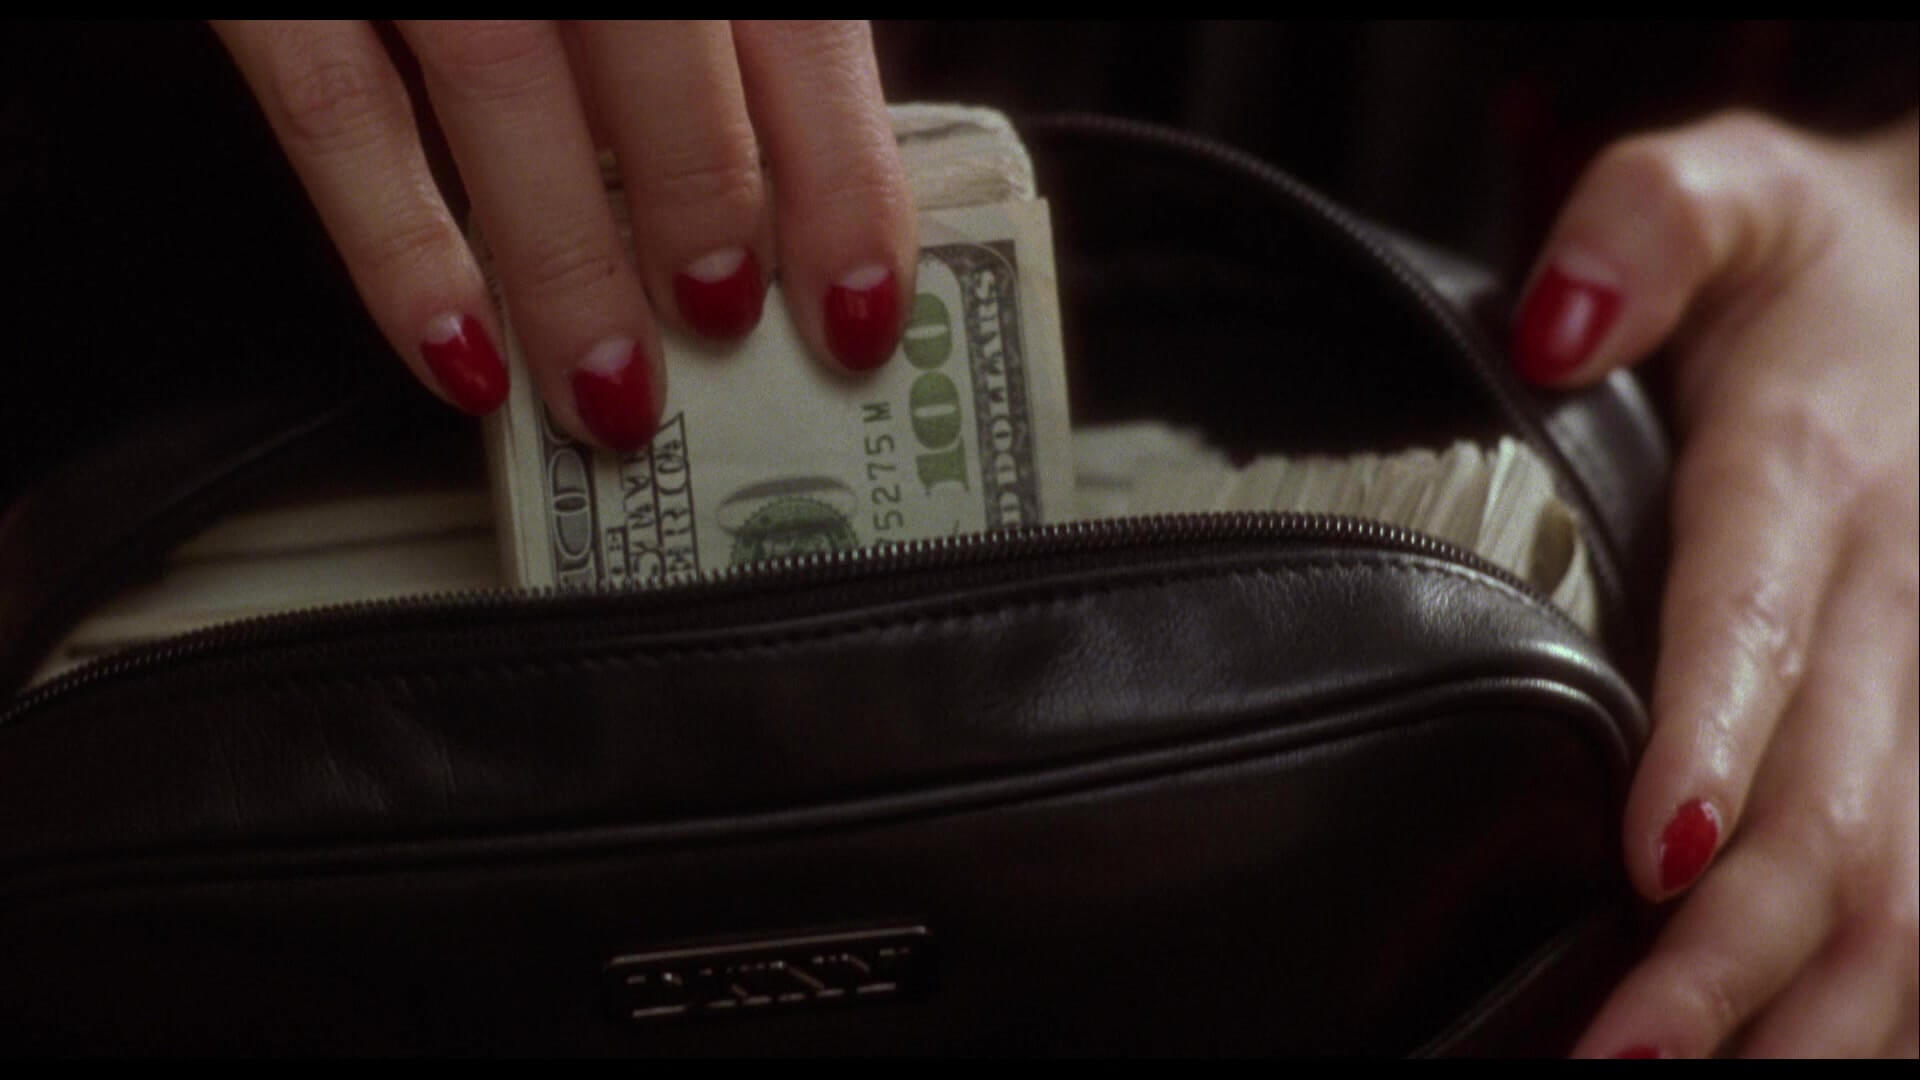 DKNY Bag in Mulholland Drive